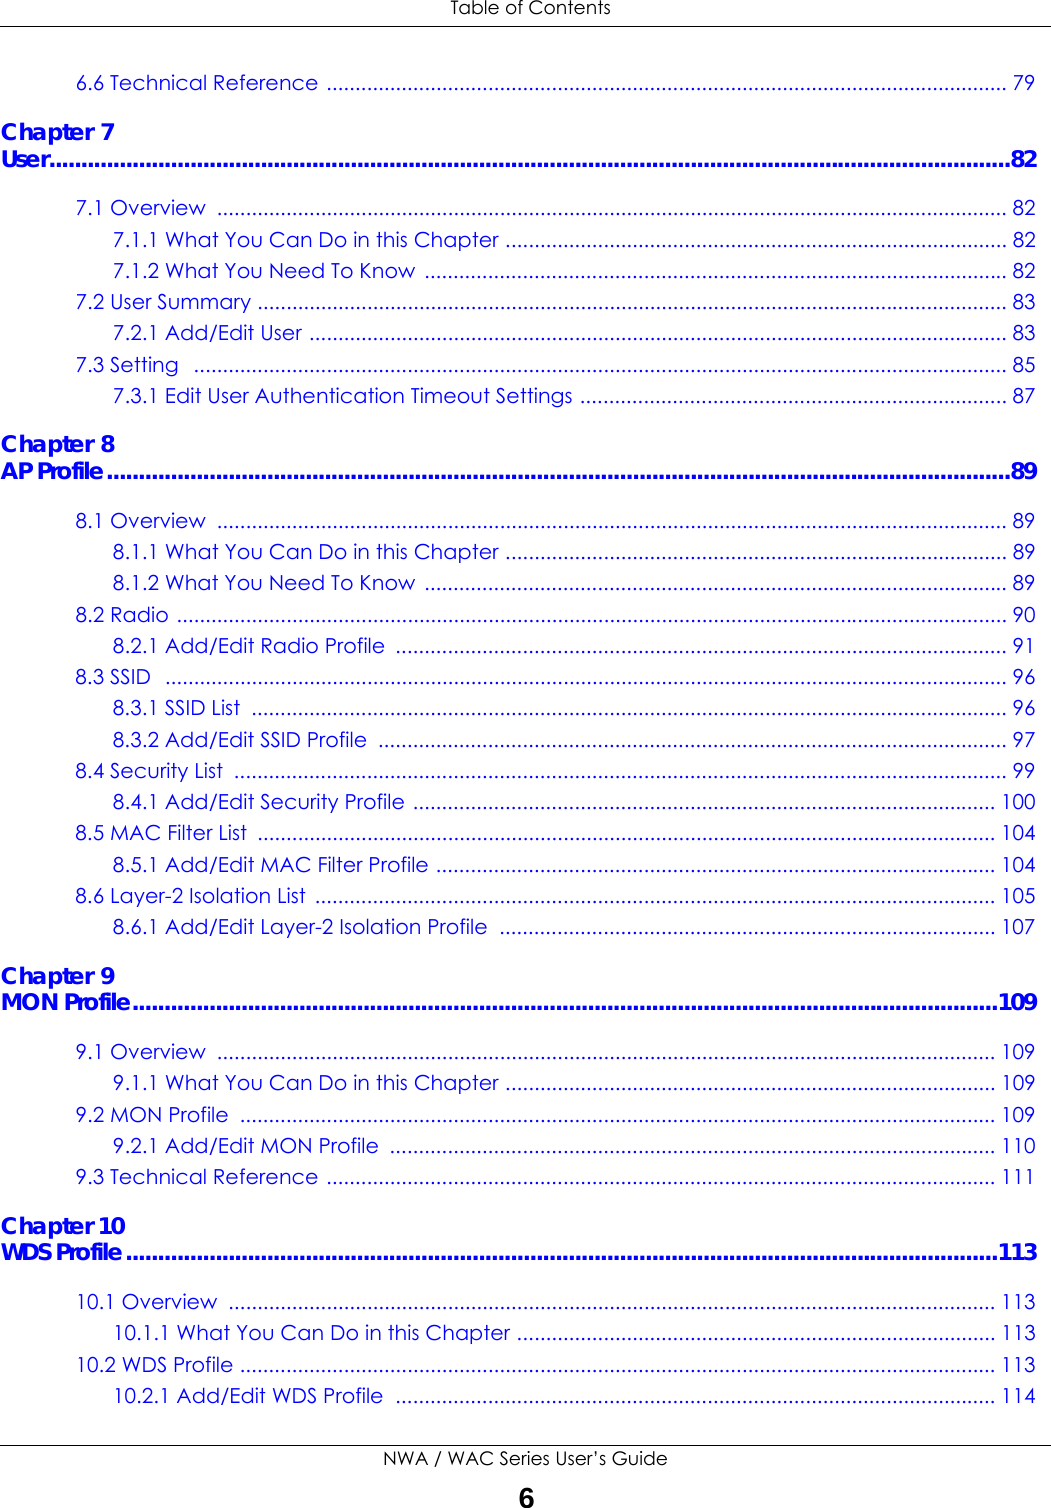  Table of ContentsNWA / WAC Series User’s Guide66.6 Technical Reference ...................................................................................................................... 79Chapter 7User......................................................................................................................................................827.1 Overview  ......................................................................................................................................... 827.1.1 What You Can Do in this Chapter ....................................................................................... 827.1.2 What You Need To Know  ..................................................................................................... 827.2 User Summary .................................................................................................................................. 837.2.1 Add/Edit User ......................................................................................................................... 837.3 Setting   ............................................................................................................................................. 857.3.1 Edit User Authentication Timeout Settings .......................................................................... 87Chapter 8AP Profile.............................................................................................................................................898.1 Overview  ......................................................................................................................................... 898.1.1 What You Can Do in this Chapter ....................................................................................... 898.1.2 What You Need To Know  ..................................................................................................... 898.2 Radio ................................................................................................................................................ 908.2.1 Add/Edit Radio Profile  .......................................................................................................... 918.3 SSID  .................................................................................................................................................. 968.3.1 SSID List  ................................................................................................................................... 968.3.2 Add/Edit SSID Profile  ............................................................................................................. 978.4 Security List  ...................................................................................................................................... 998.4.1 Add/Edit Security Profile ..................................................................................................... 1008.5 MAC Filter List  ................................................................................................................................ 1048.5.1 Add/Edit MAC Filter Profile ................................................................................................. 1048.6 Layer-2 Isolation List  ...................................................................................................................... 1058.6.1 Add/Edit Layer-2 Isolation Profile  ...................................................................................... 107Chapter 9MON Profile.......................................................................................................................................1099.1 Overview  ....................................................................................................................................... 1099.1.1 What You Can Do in this Chapter ..................................................................................... 1099.2 MON Profile  ................................................................................................................................... 1099.2.1 Add/Edit MON Profile  ......................................................................................................... 1109.3 Technical Reference .................................................................................................................... 111Chapter 10WDS Profile........................................................................................................................................11310.1 Overview  ..................................................................................................................................... 11310.1.1 What You Can Do in this Chapter ................................................................................... 11310.2 WDS Profile ................................................................................................................................... 11310.2.1 Add/Edit WDS Profile  ........................................................................................................ 114